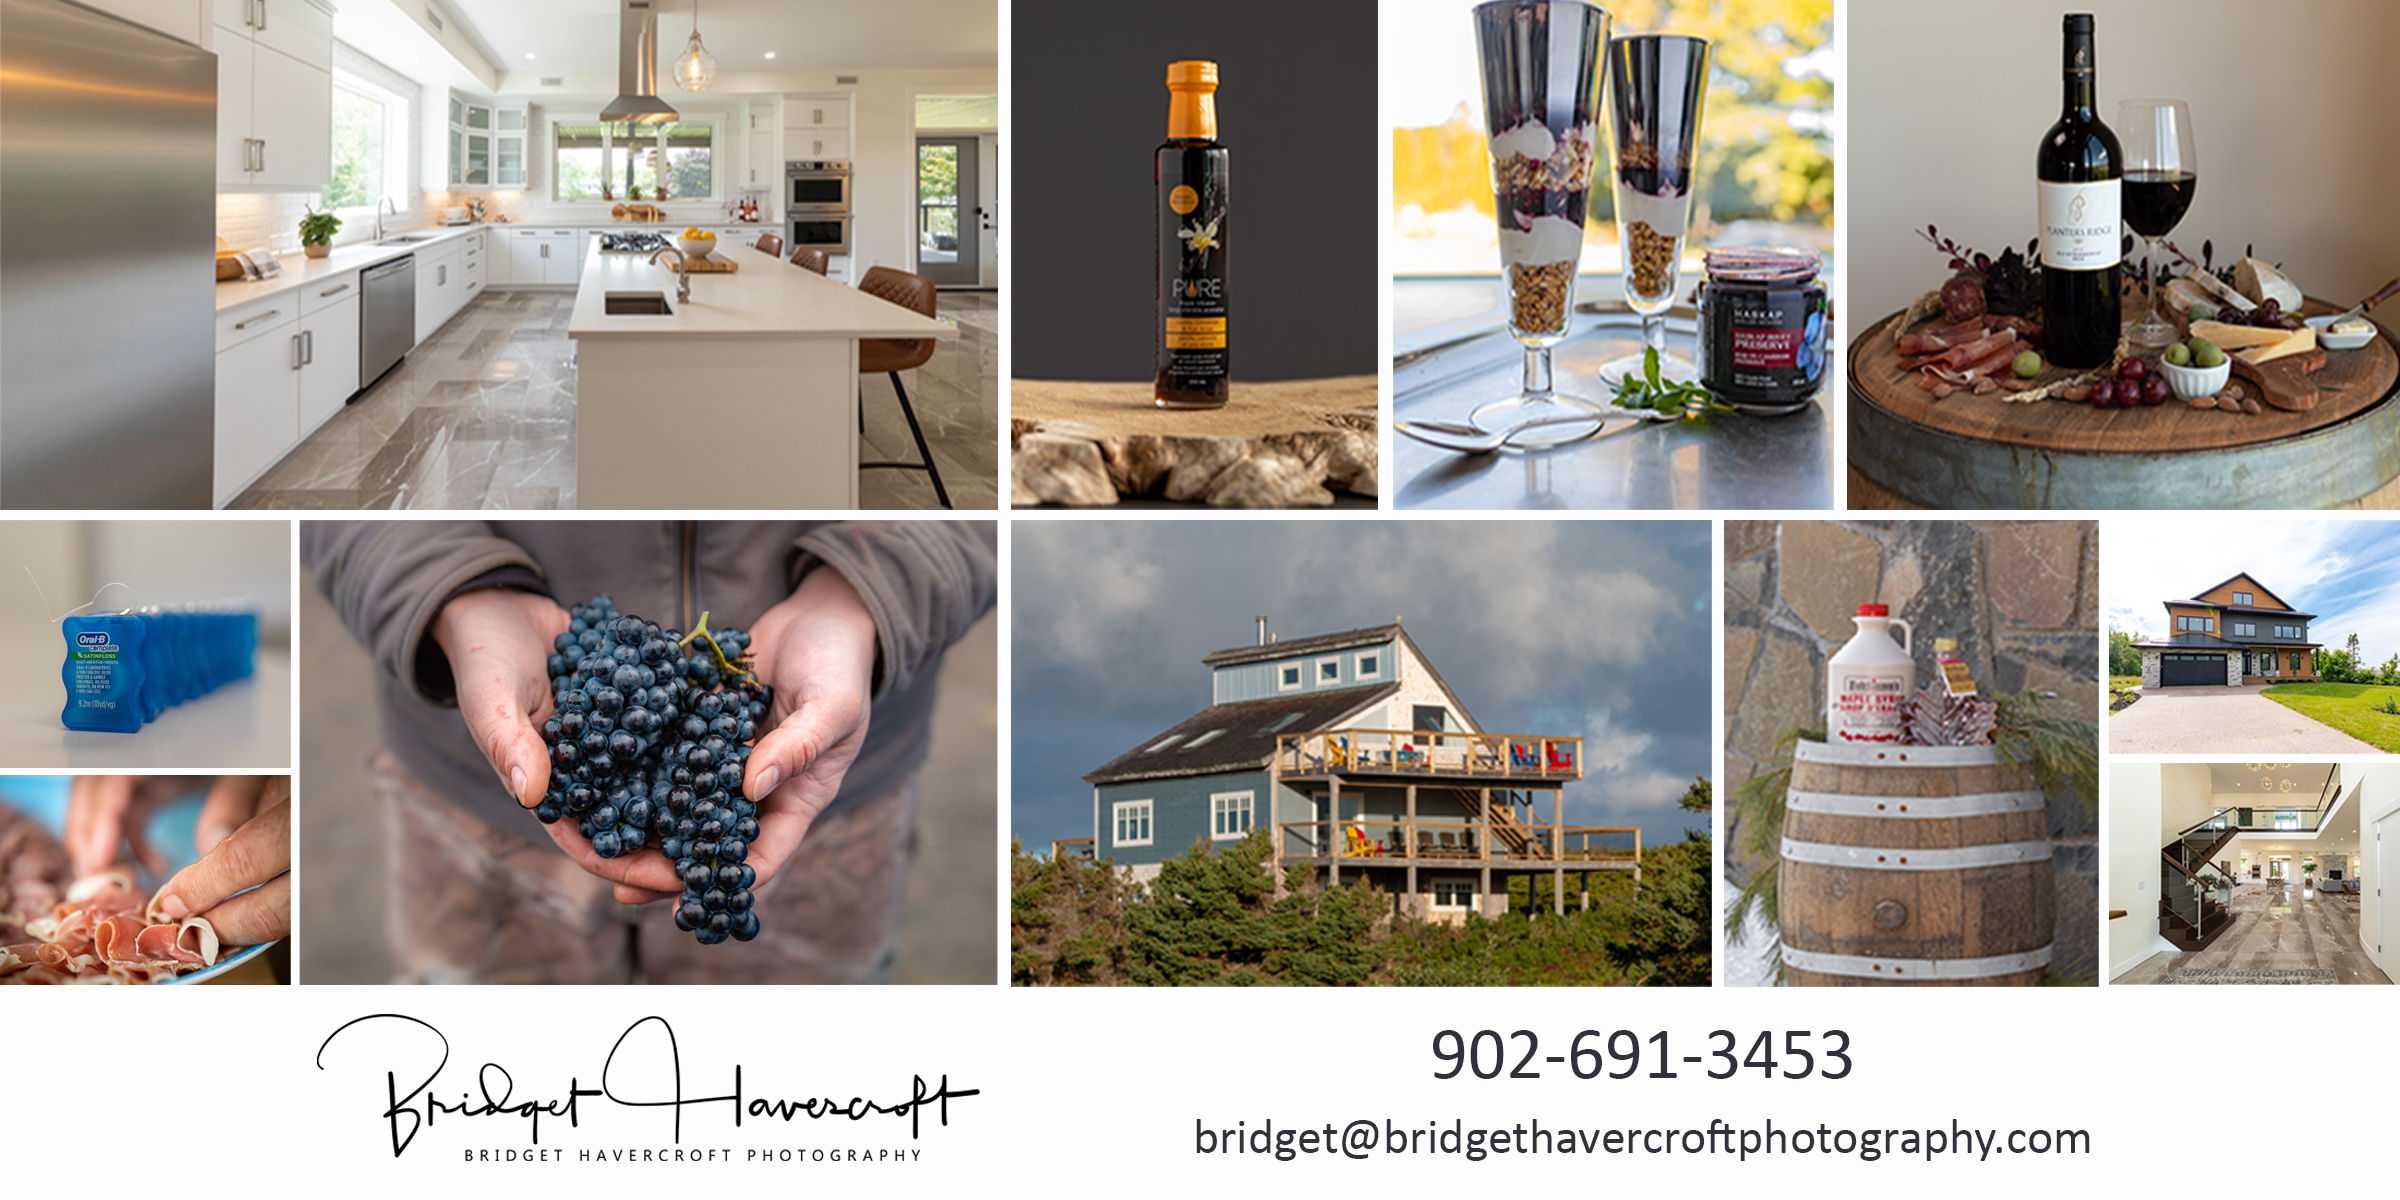 A collage of business and product photos by Bridget Havercroft